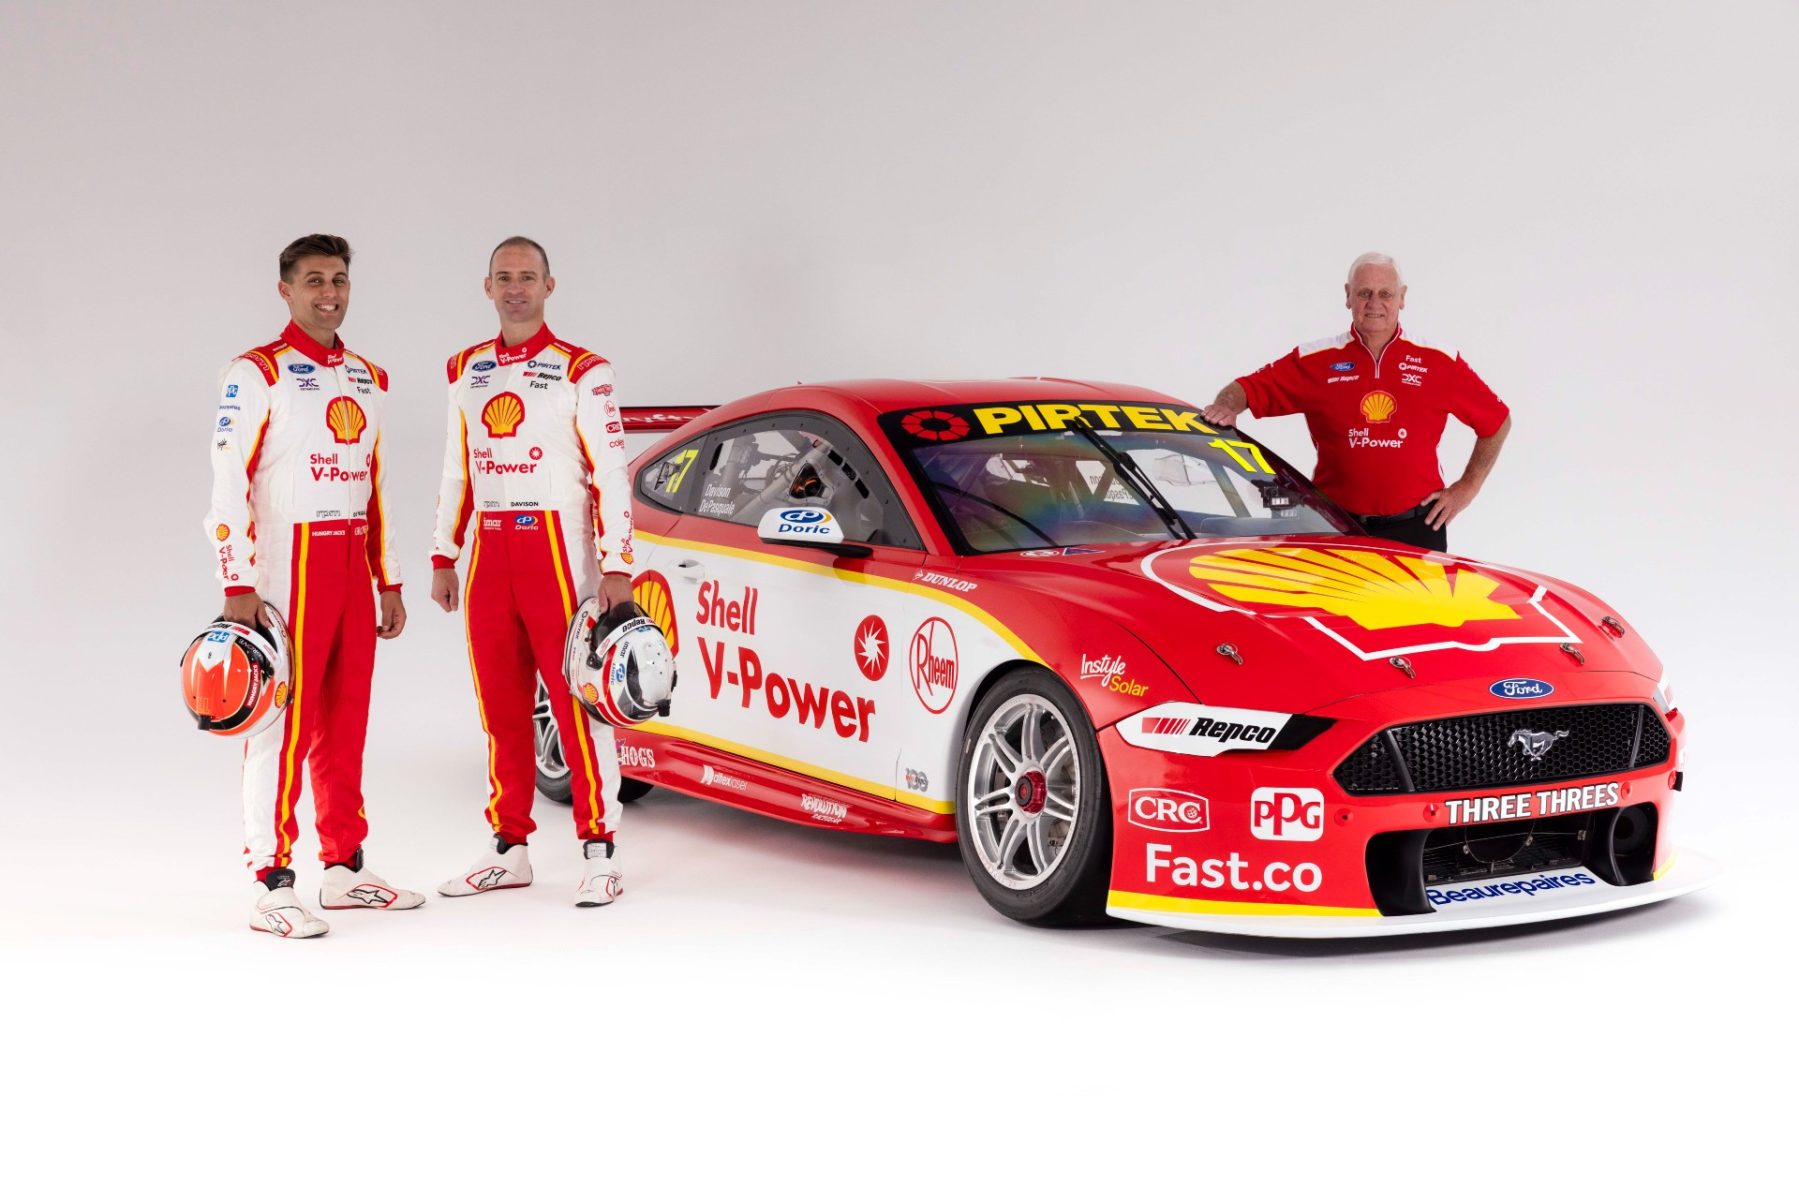 How to Choose the Perfect Shell V-Power Racing Team Merchandise?